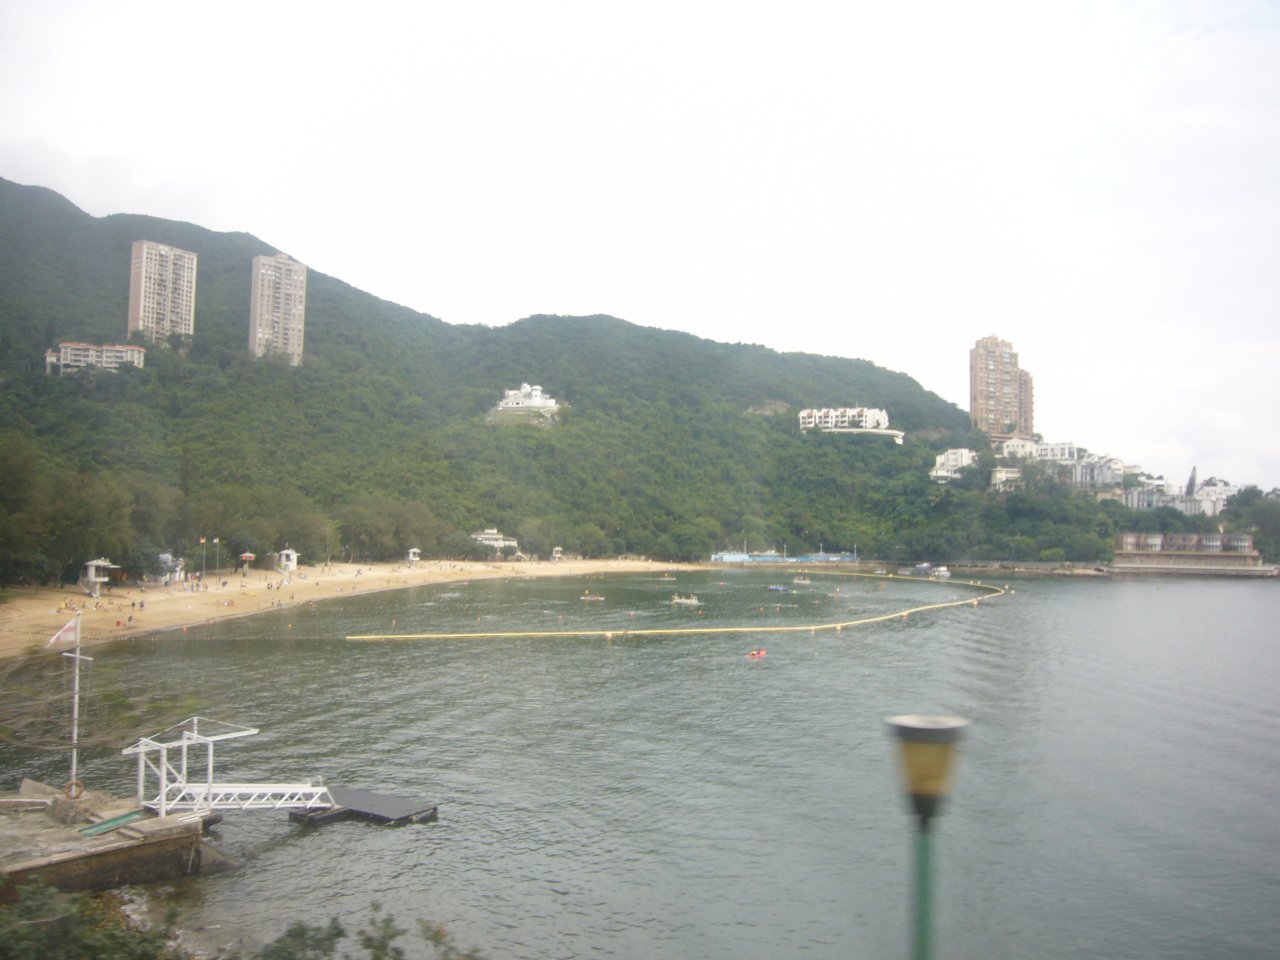 JPEG image - View from the bus of Repuse Bay and its beaches ...